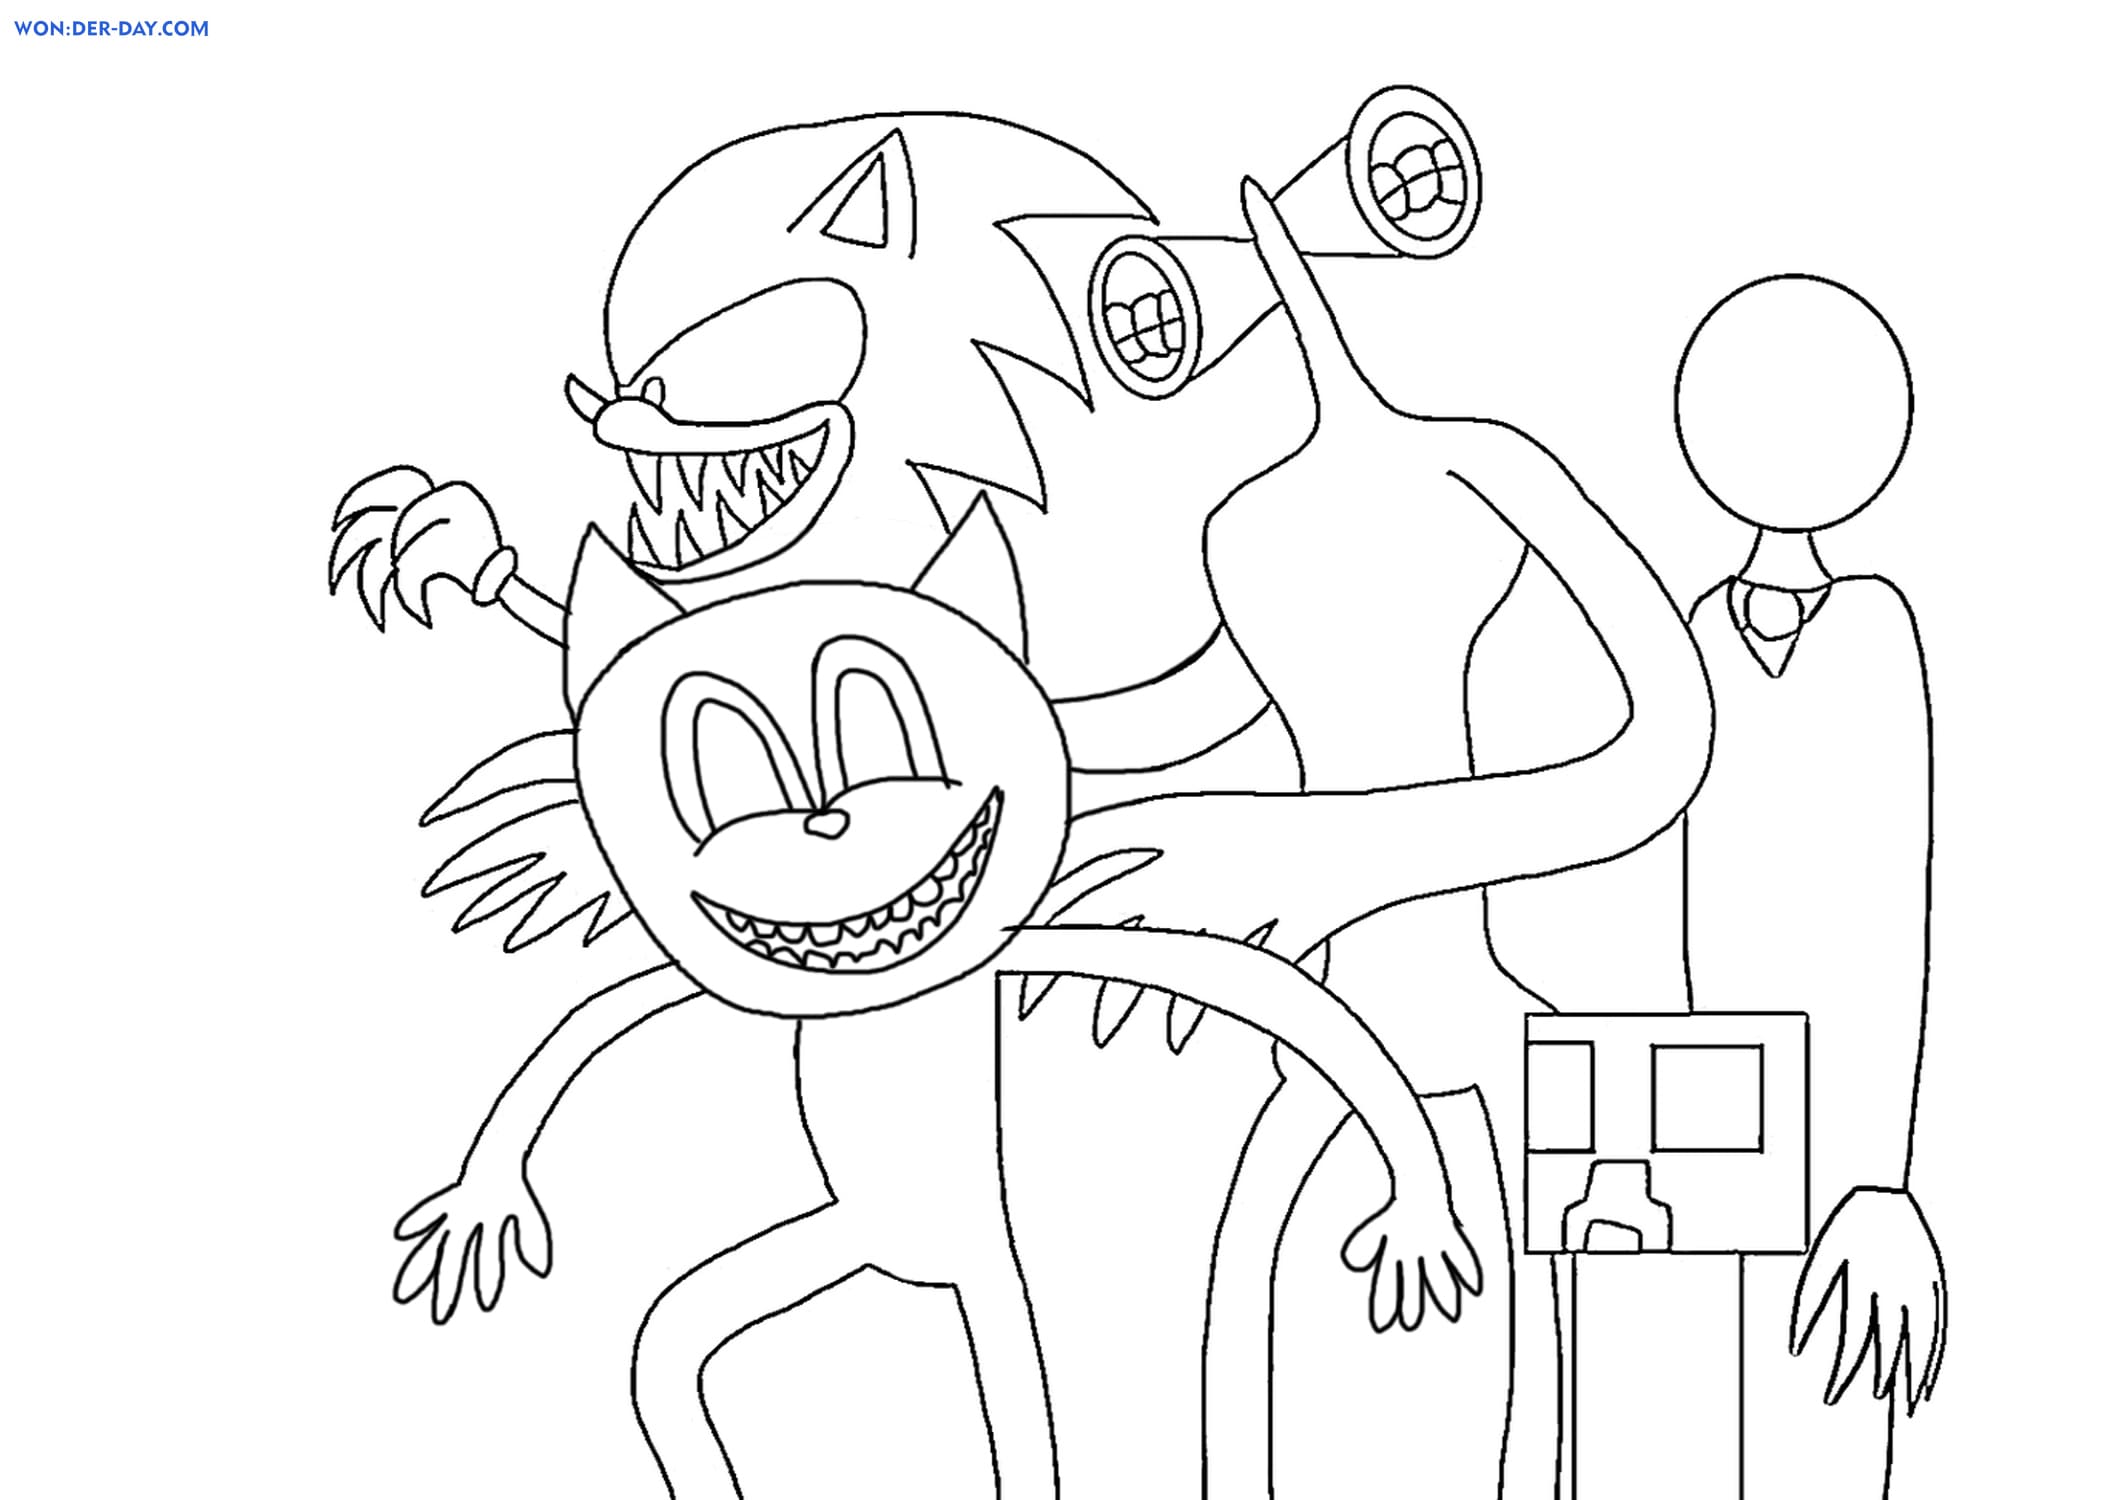 Cartoon Cat coloring pages for free printing — WONDER DAY — Coloring